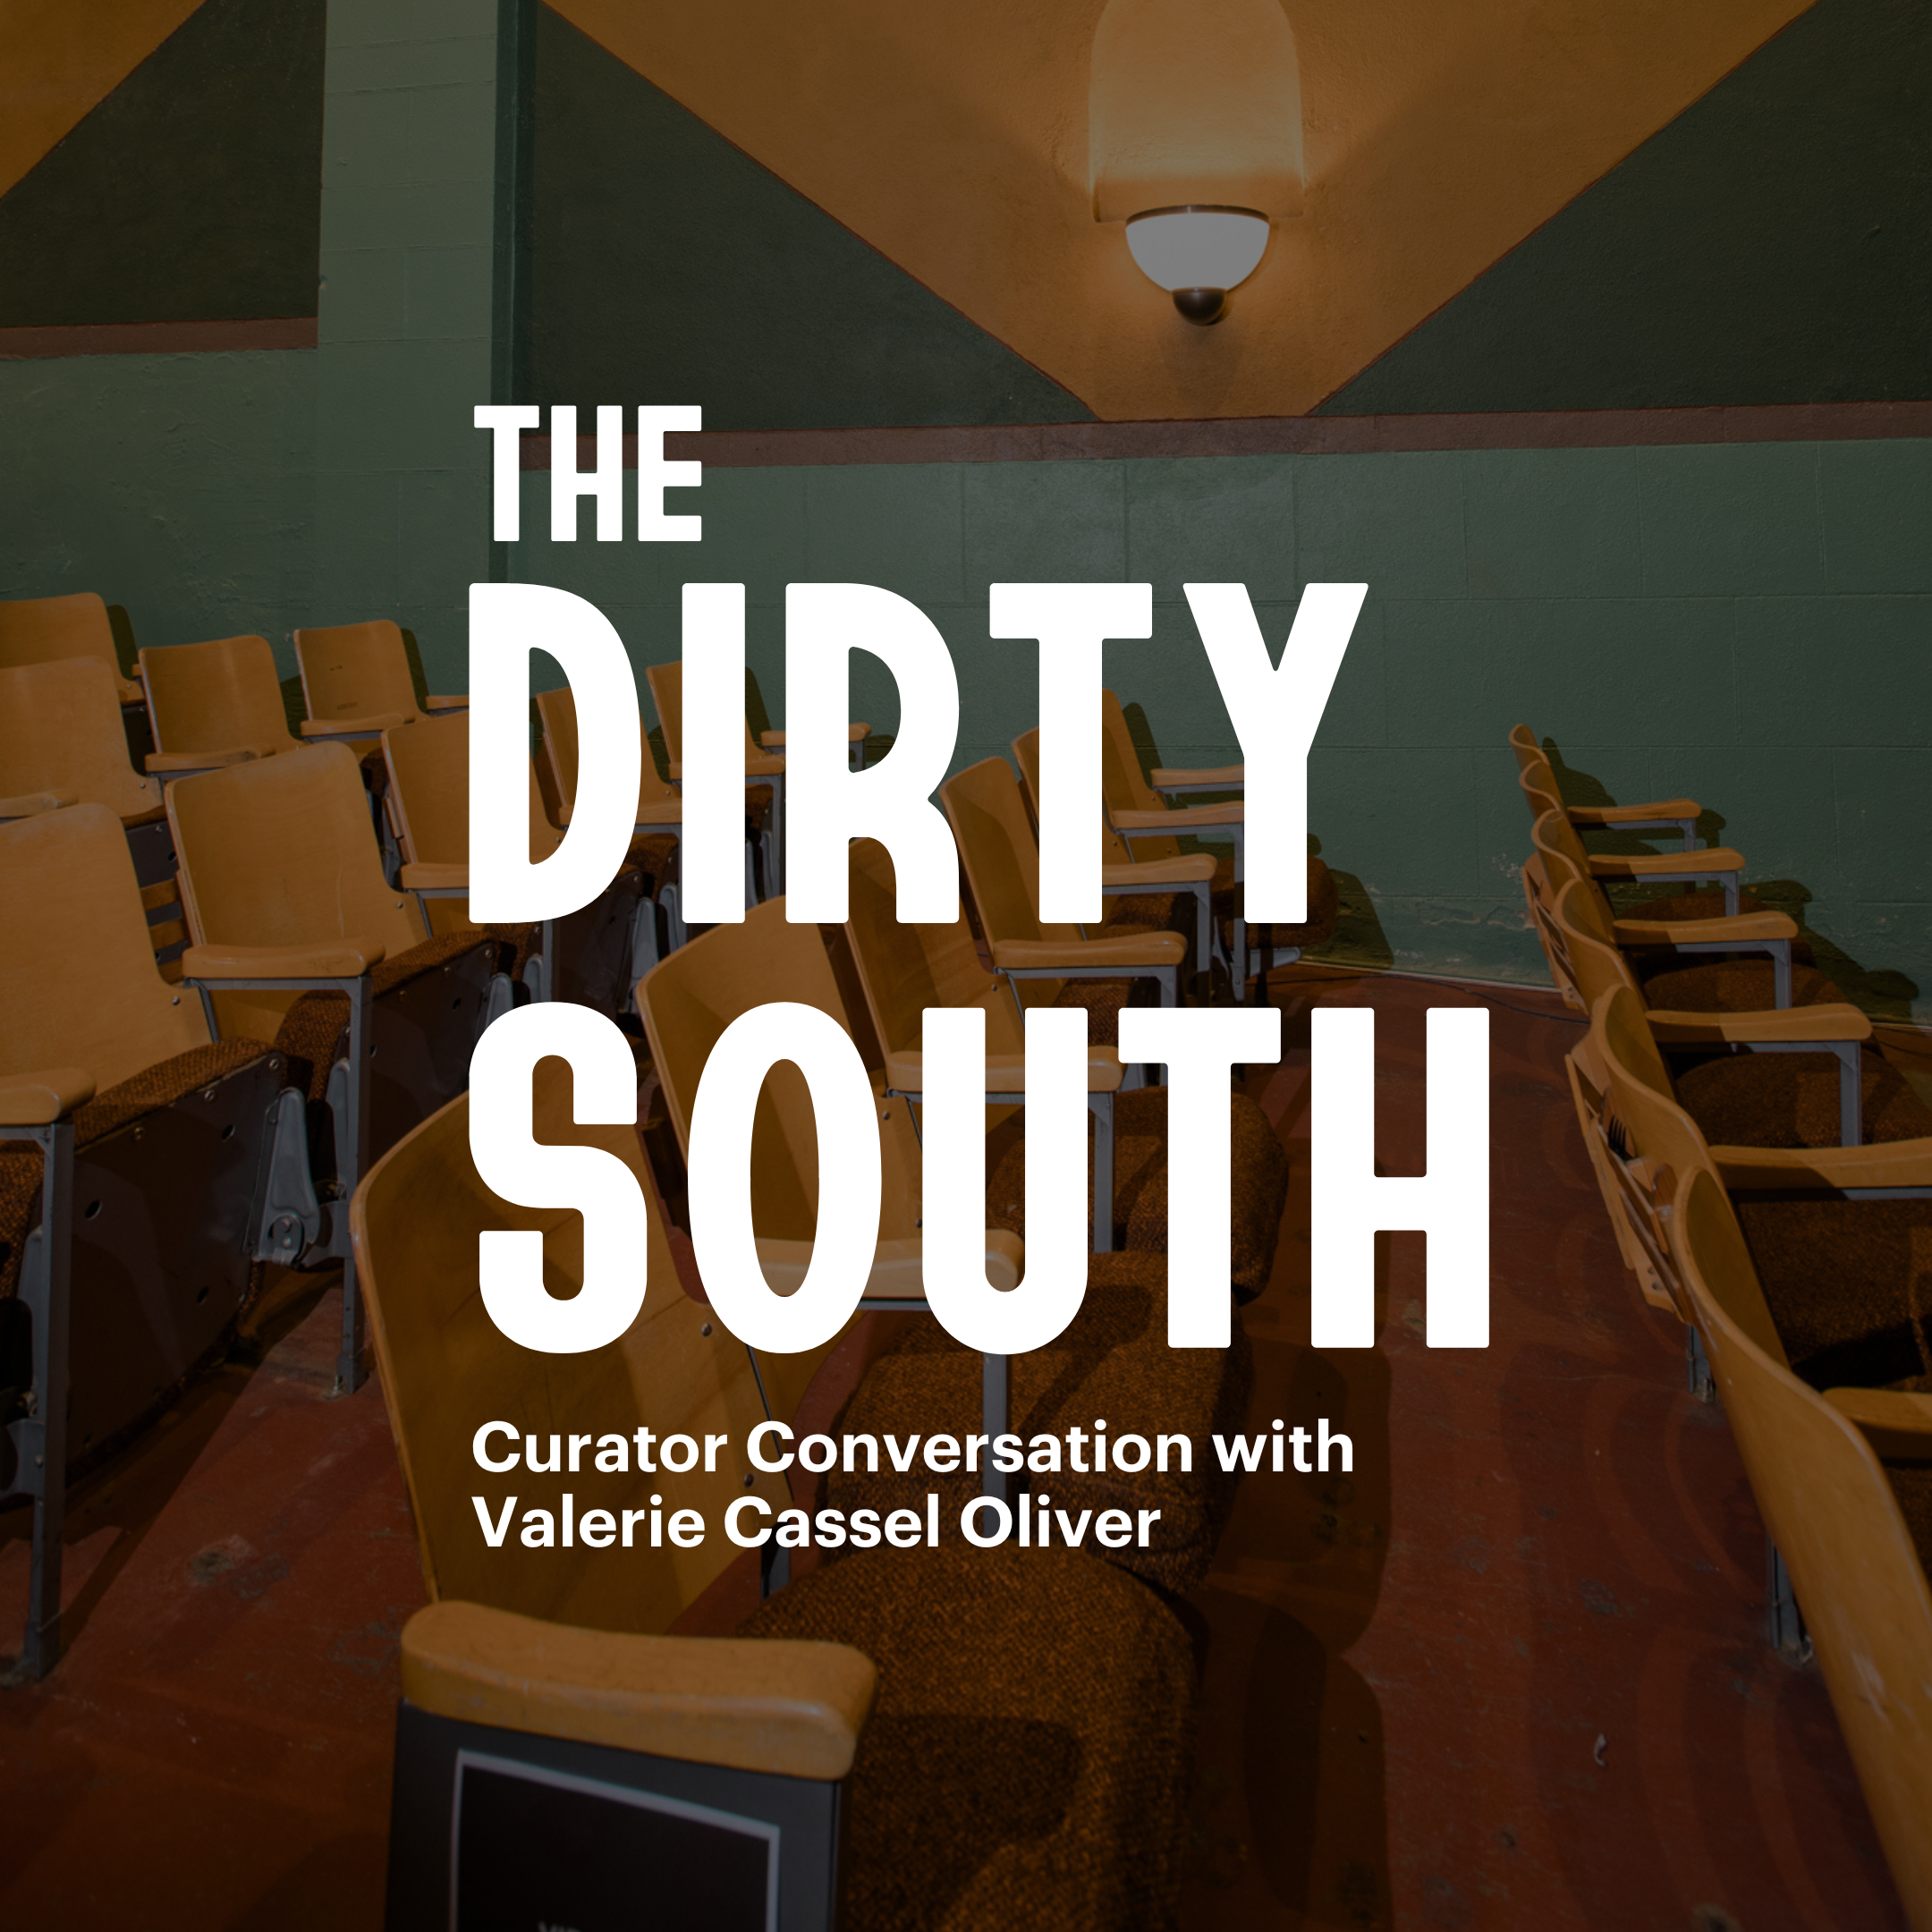 Seats in a theater with text overlay that reads, "The Dirty South Curator Conversation With Valerie Cassel Oliver"